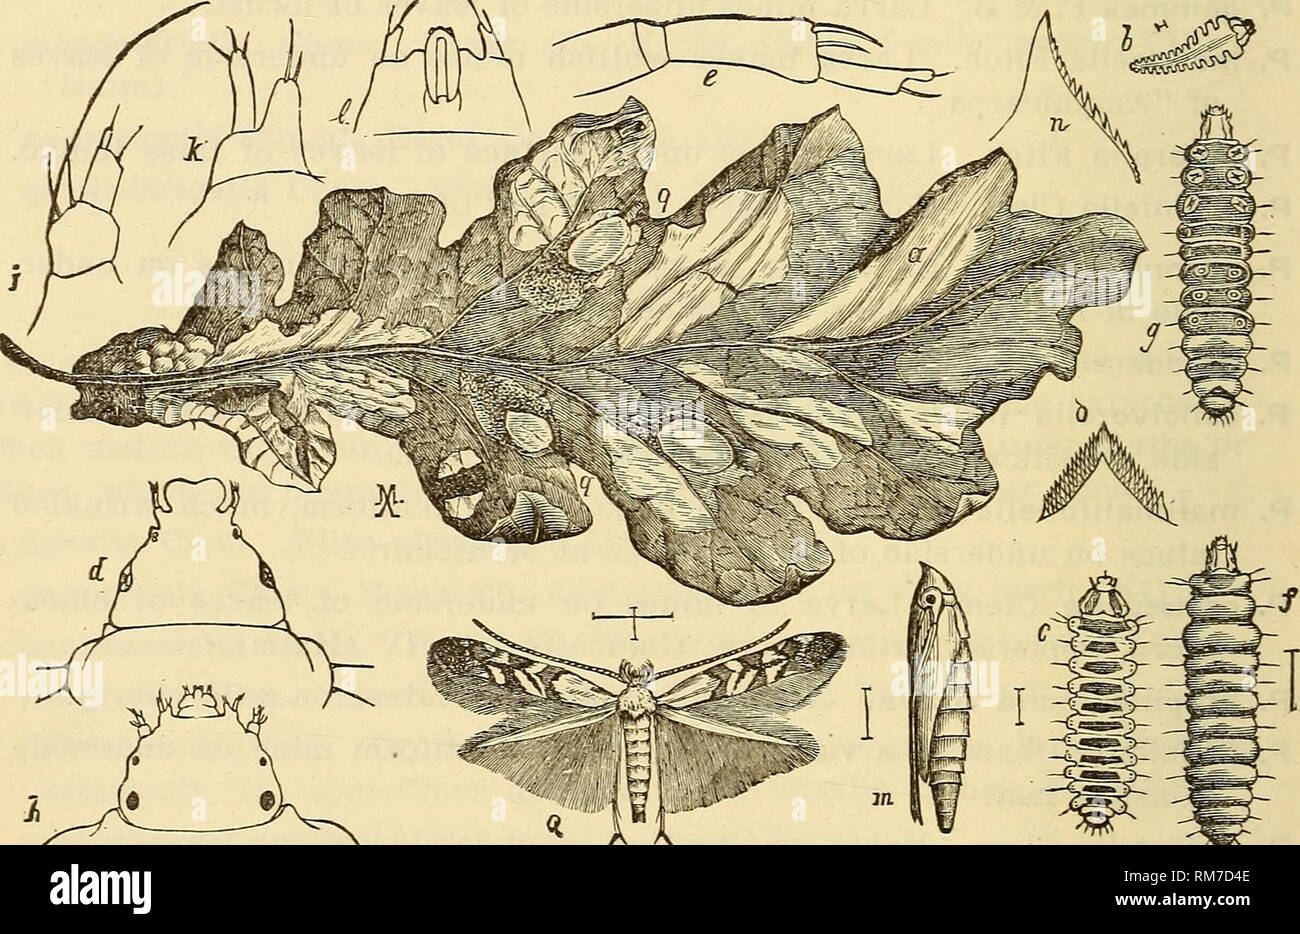 . Annual report, including a report of the insects of New Jersey, 1909. 570 REPORT OF NEW JERSEY STATE MUSEUM. p. tilieacella Cham. Larvae make nearly circular tentlform mines on upperside of leaves of basswood. P. tragi I el la P. &amp; B. Larva in underside mines on leaves of &quot;Lonicera.&quot; P. salicifollella Clem. Larvae in underside mines on leaves of different species of poplar and willow. P. caryaefoliella Clem. Larva mines upperside of hickory leaves, g. d. P. lentella Braun. Larvae found in community mines on upperside of leaves of black birch and ironwood. P. saccharella Braun.  Stock Photo